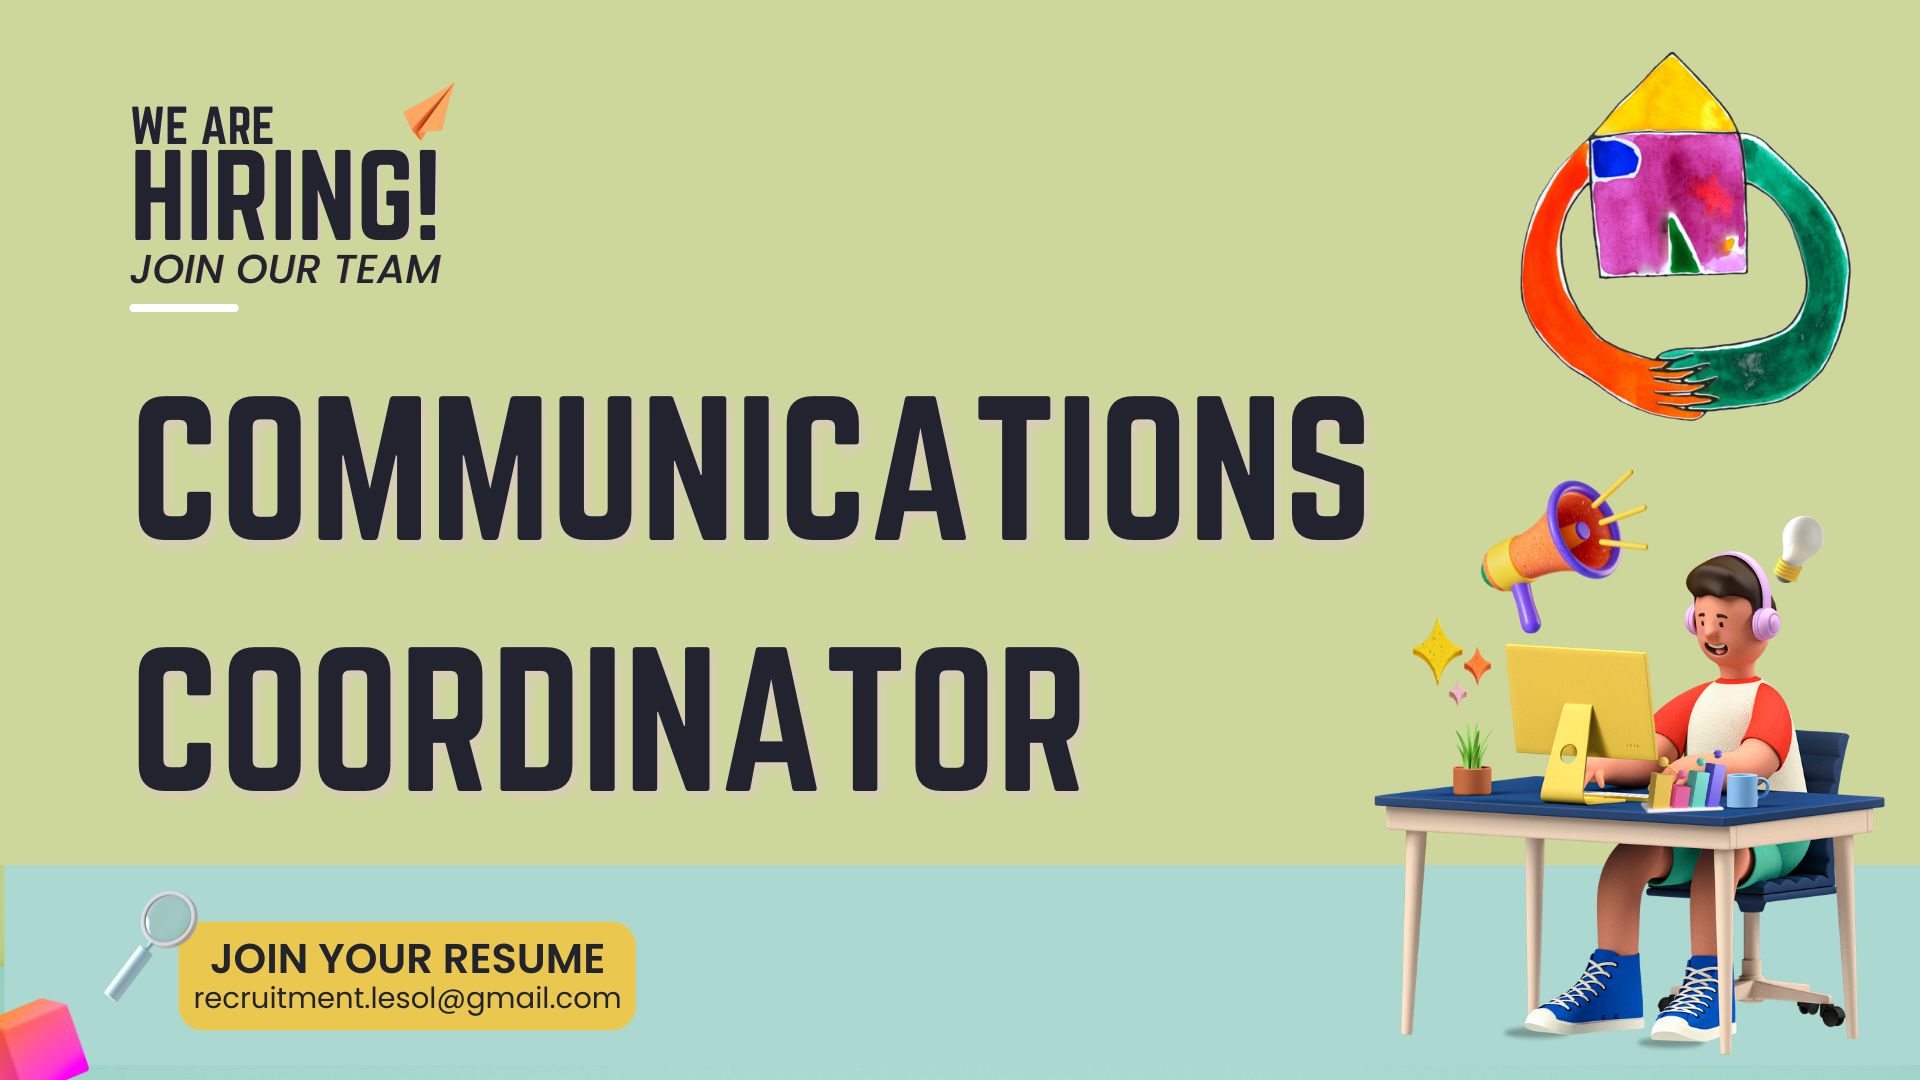 We are looking for Communications Coordinator